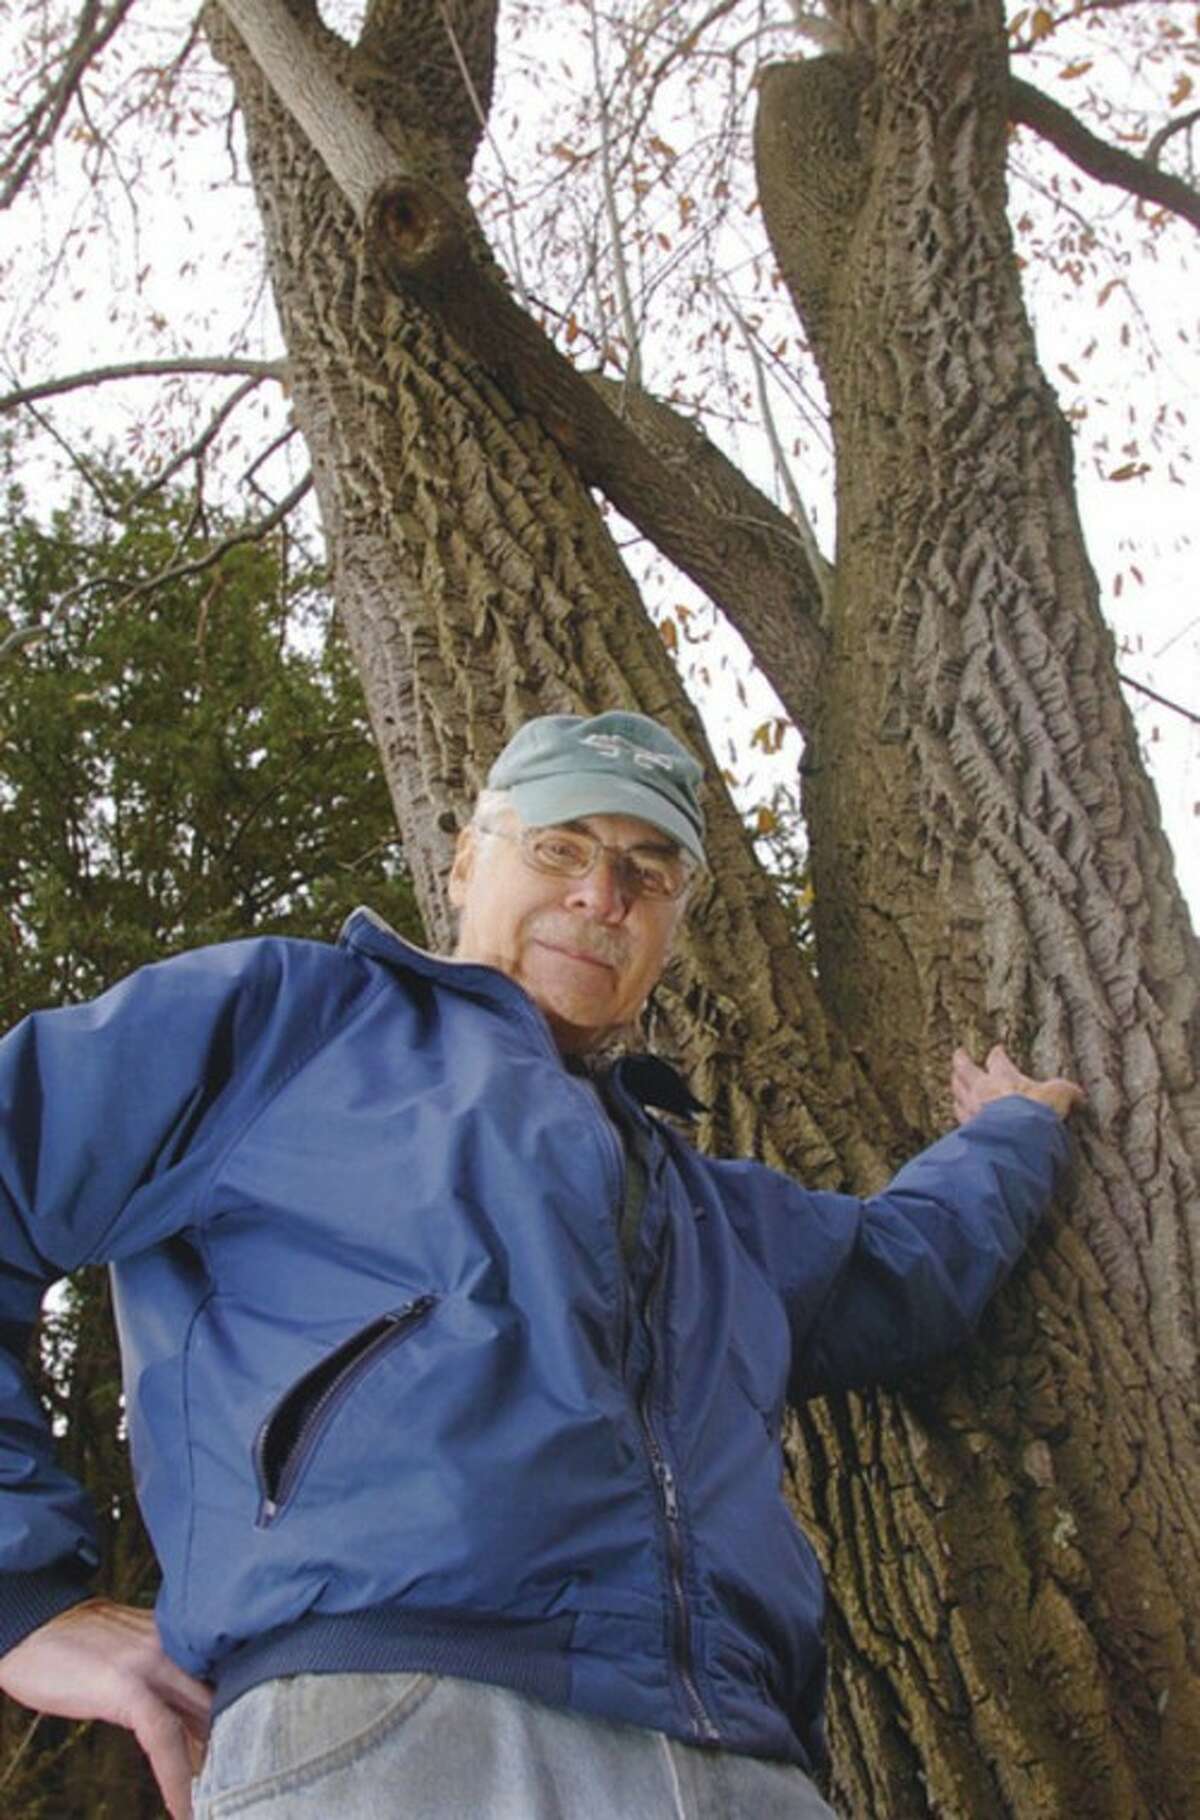 Hour photo / Erik Trautmann Dan Landau, president of the Norwalk Tree Alliance, stands next to the largest Sour Gum tree in Connecticut, which the alliance helped put on its state registry of trees.